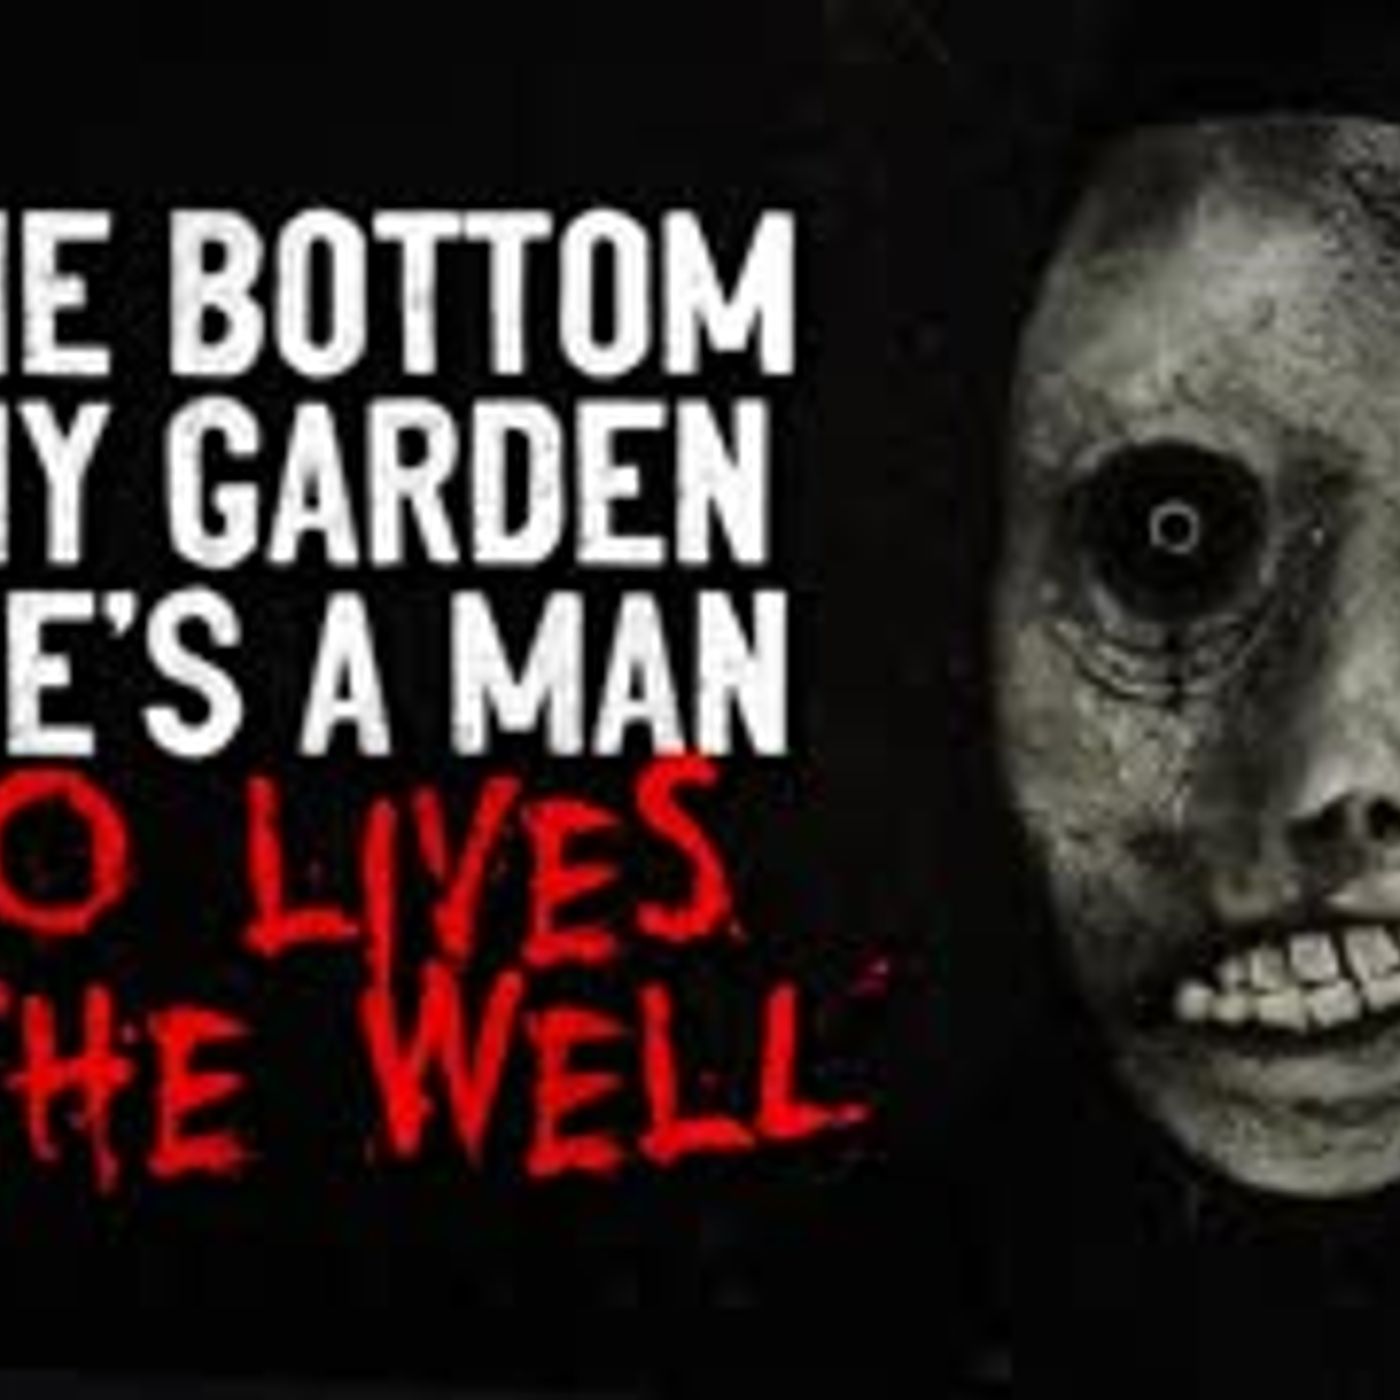 "At the bottom of my garden, there's a man who lives in the well" Creepypasta